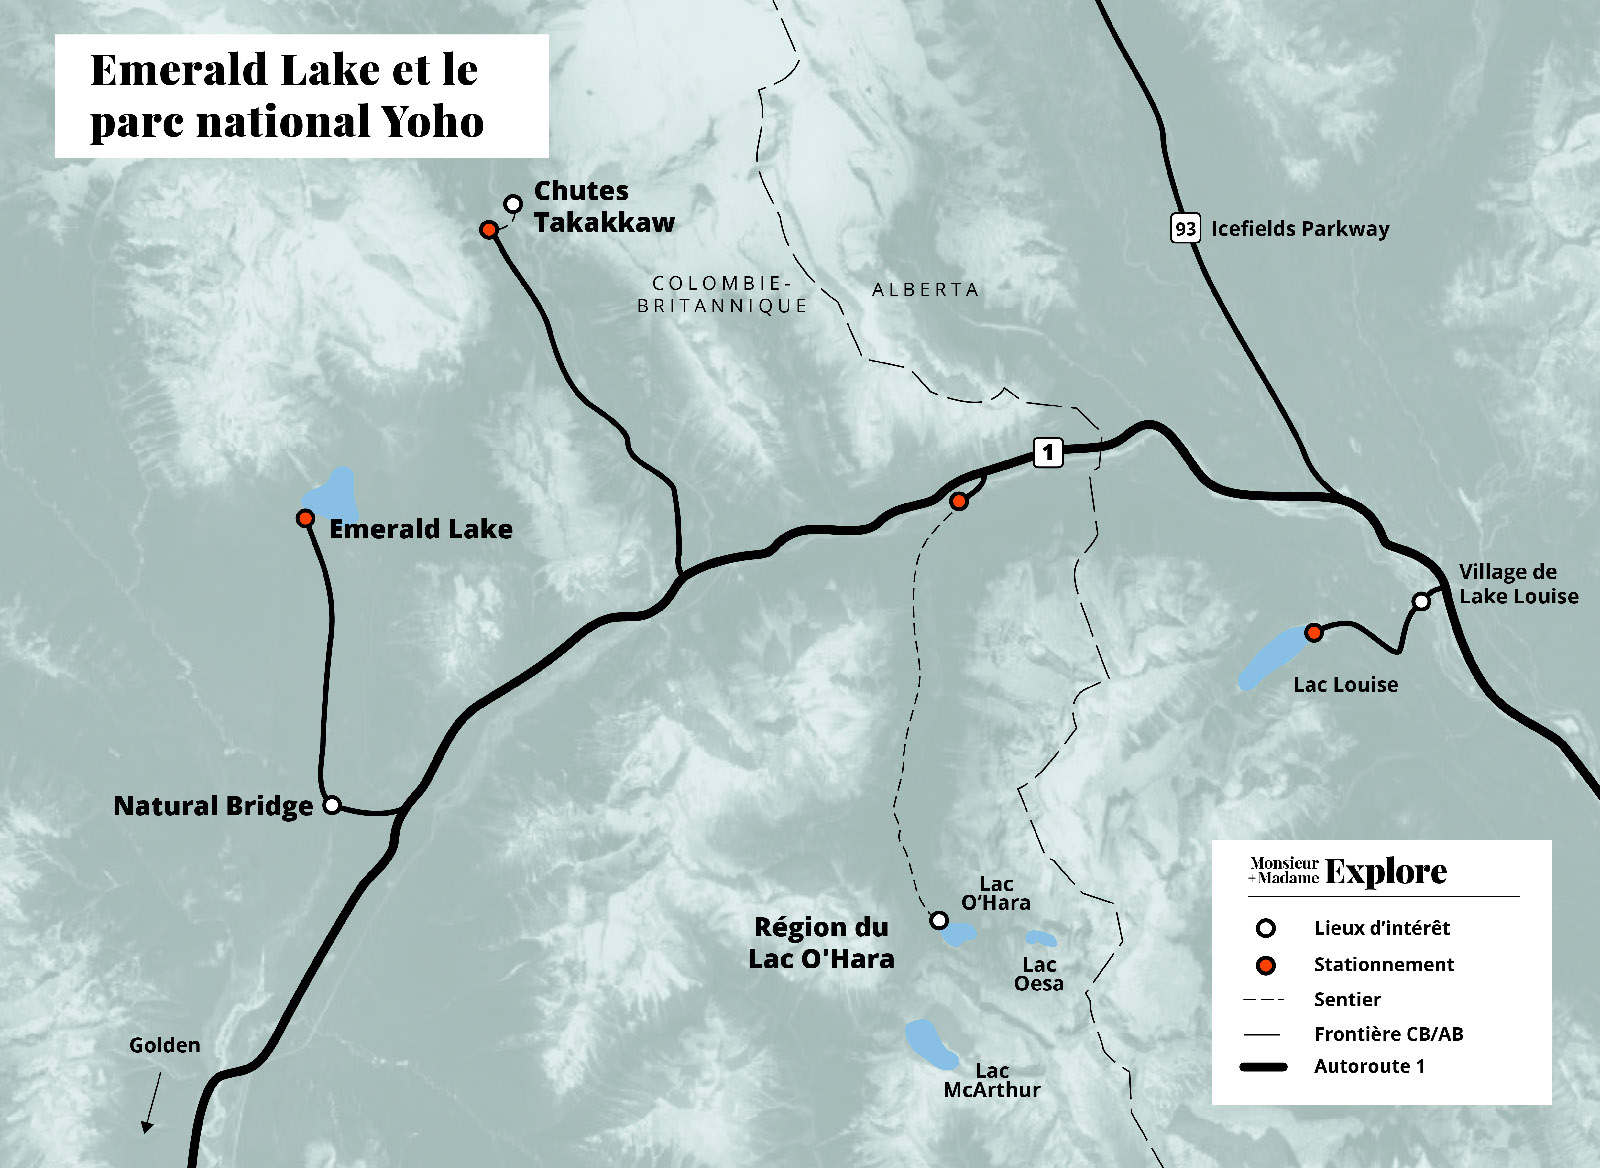 Carte de Emerald Lake et des incontournables du parc national Yoho, Rocheuses canadiennes, Canada / Map of all the must-do in Emerald Lake and Yoho National Park, Canadian Rockies, Canada